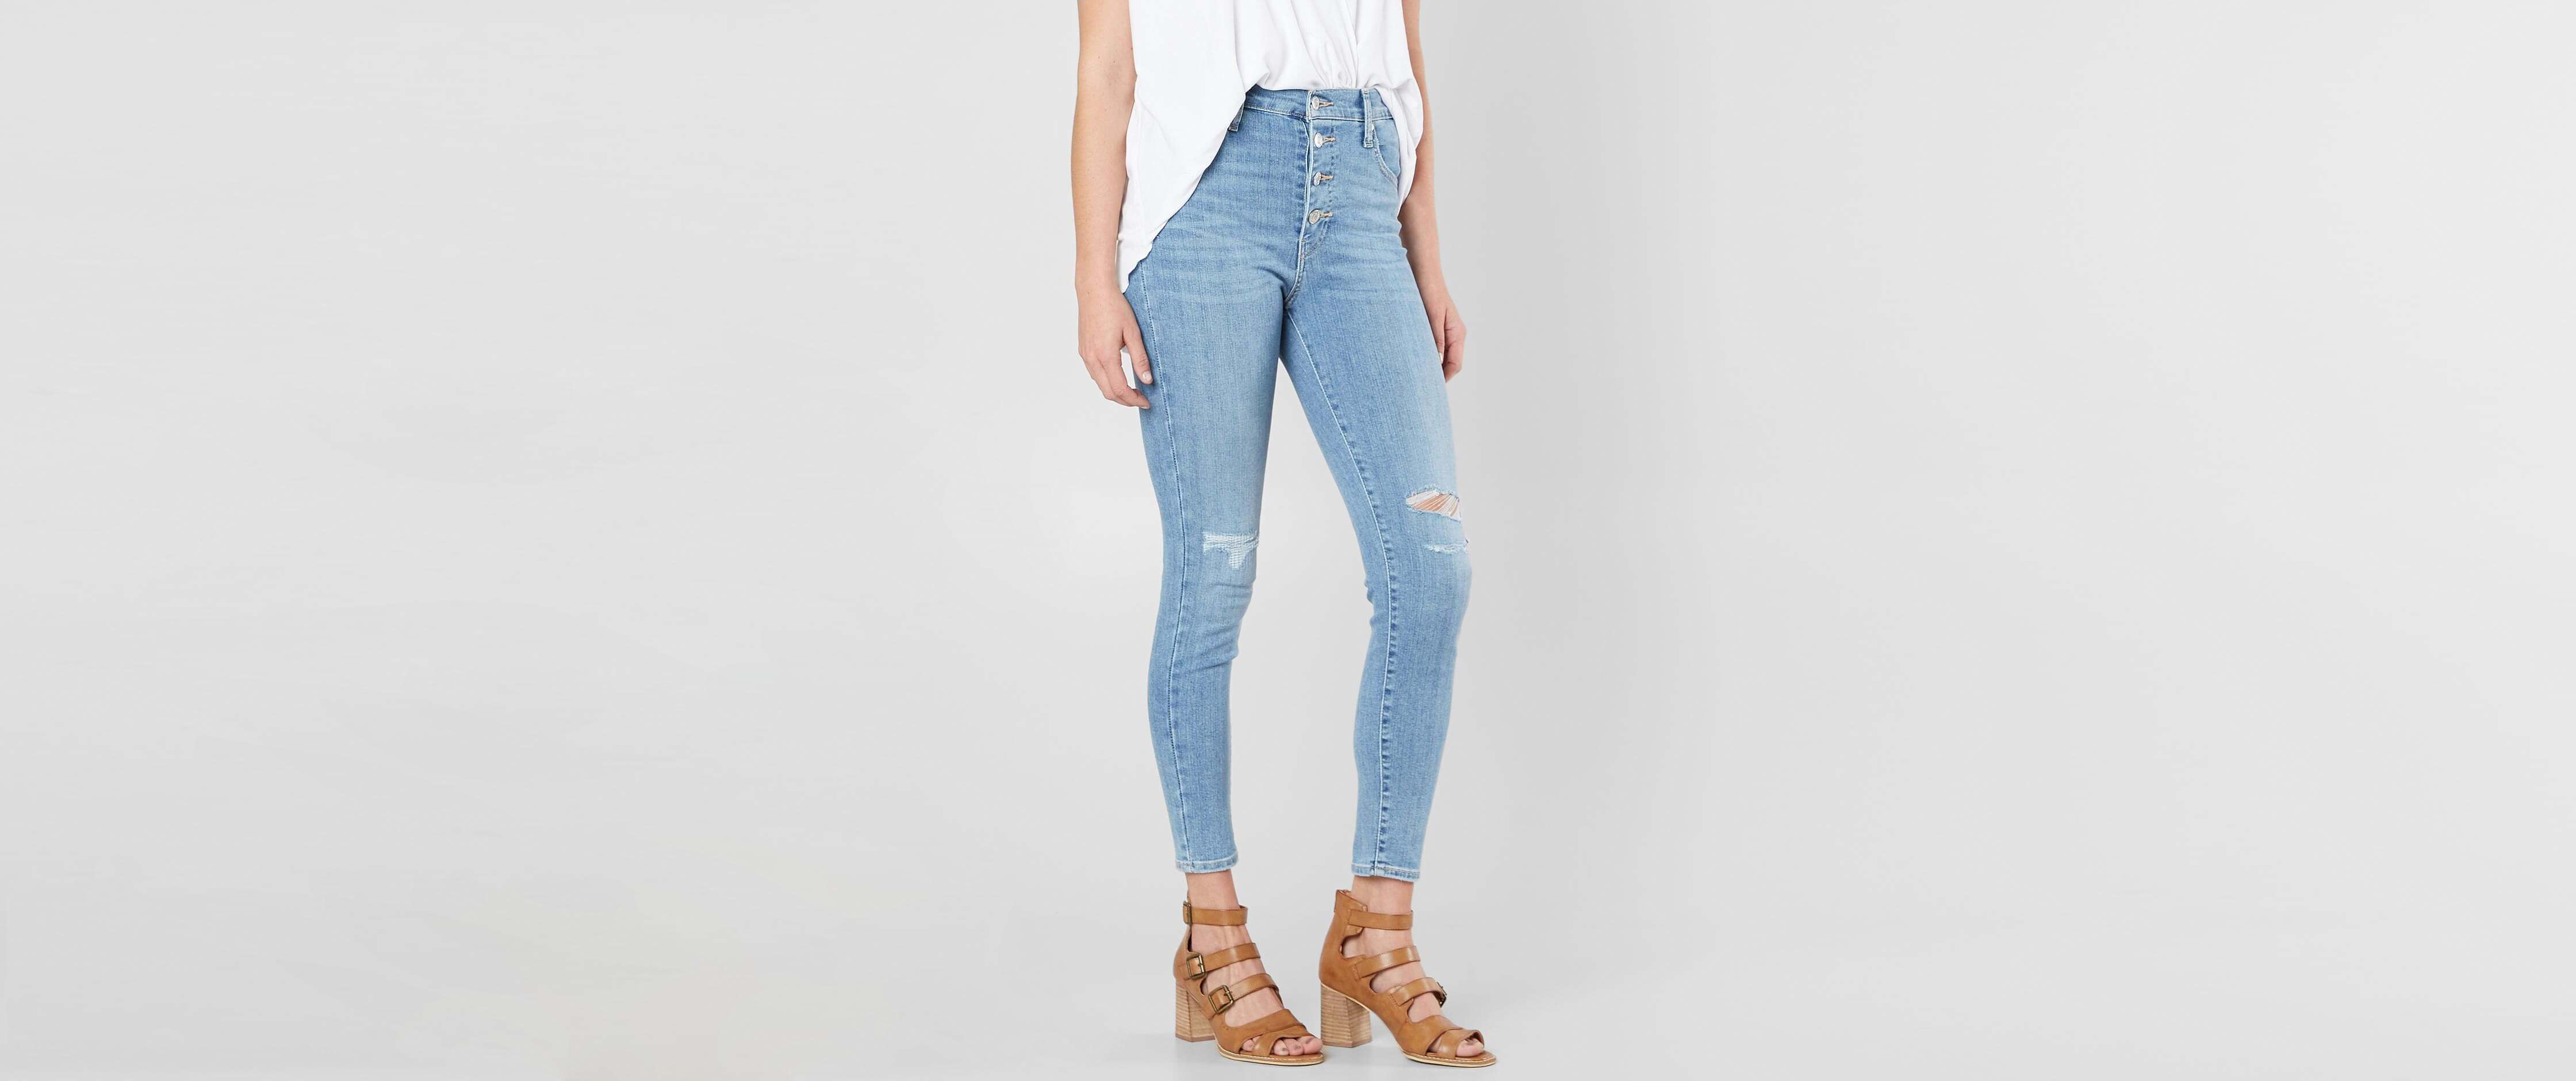 mile high ankle skinny jeans levis